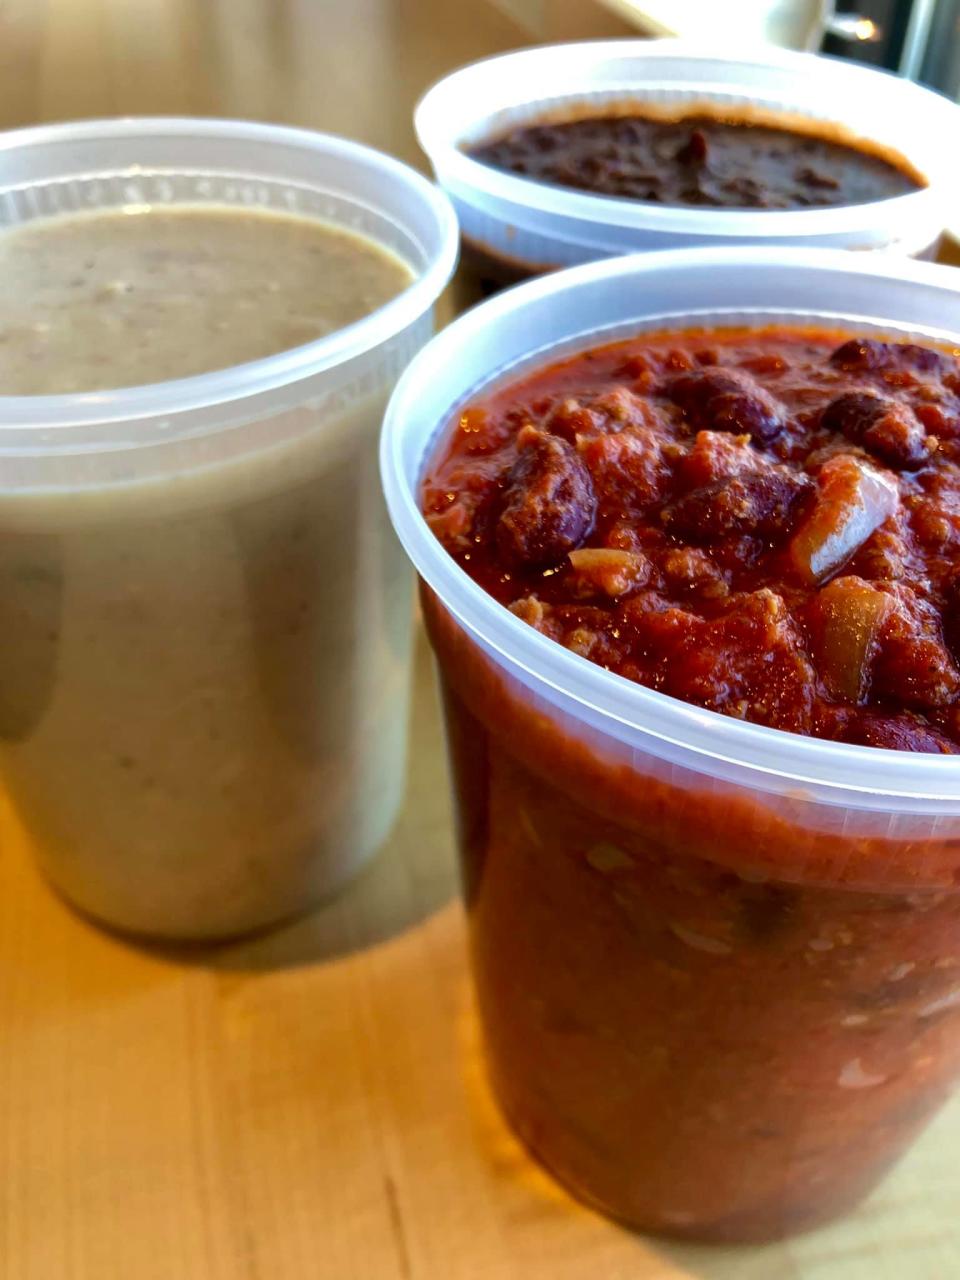 Soups now available at Hive include chicken velvet, black bean and Lennie's voodoo chili.